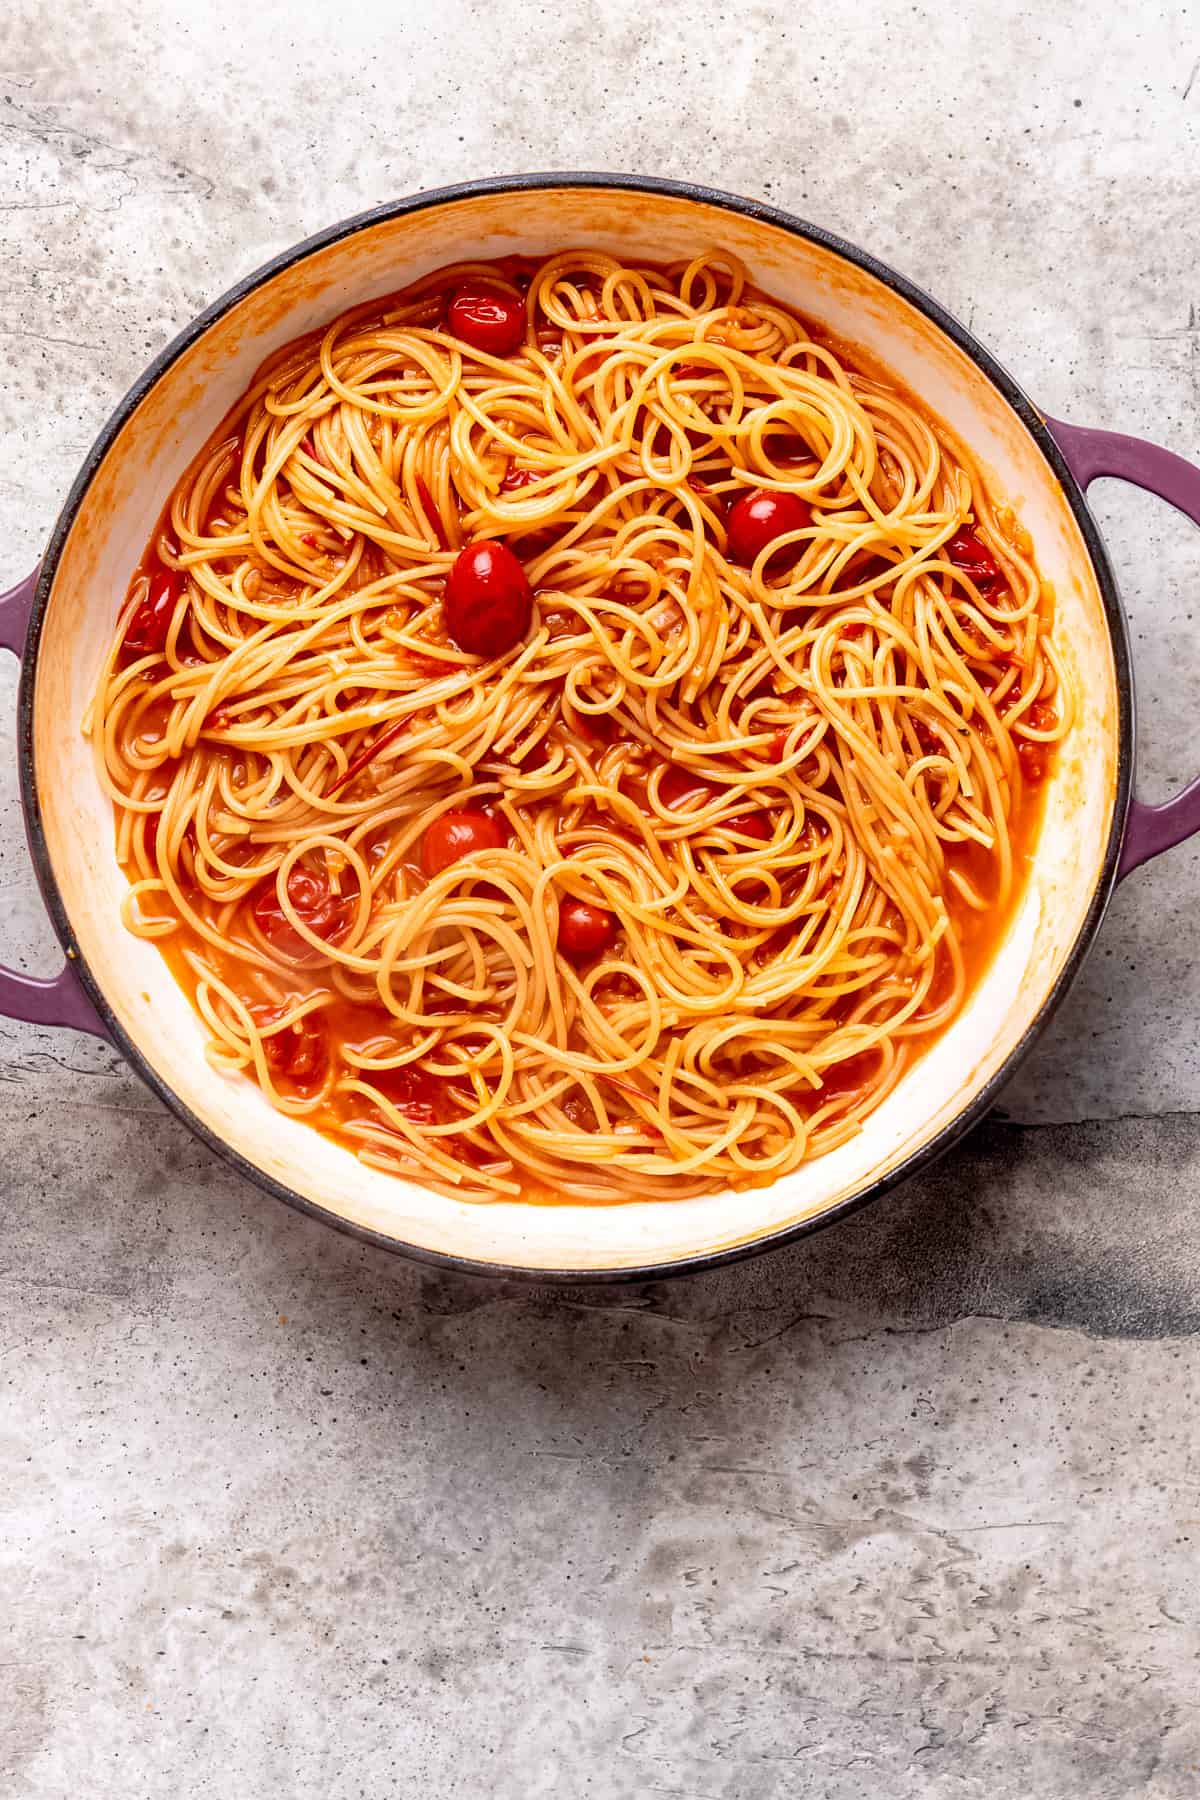 Cooked pasta in tomato sauce.